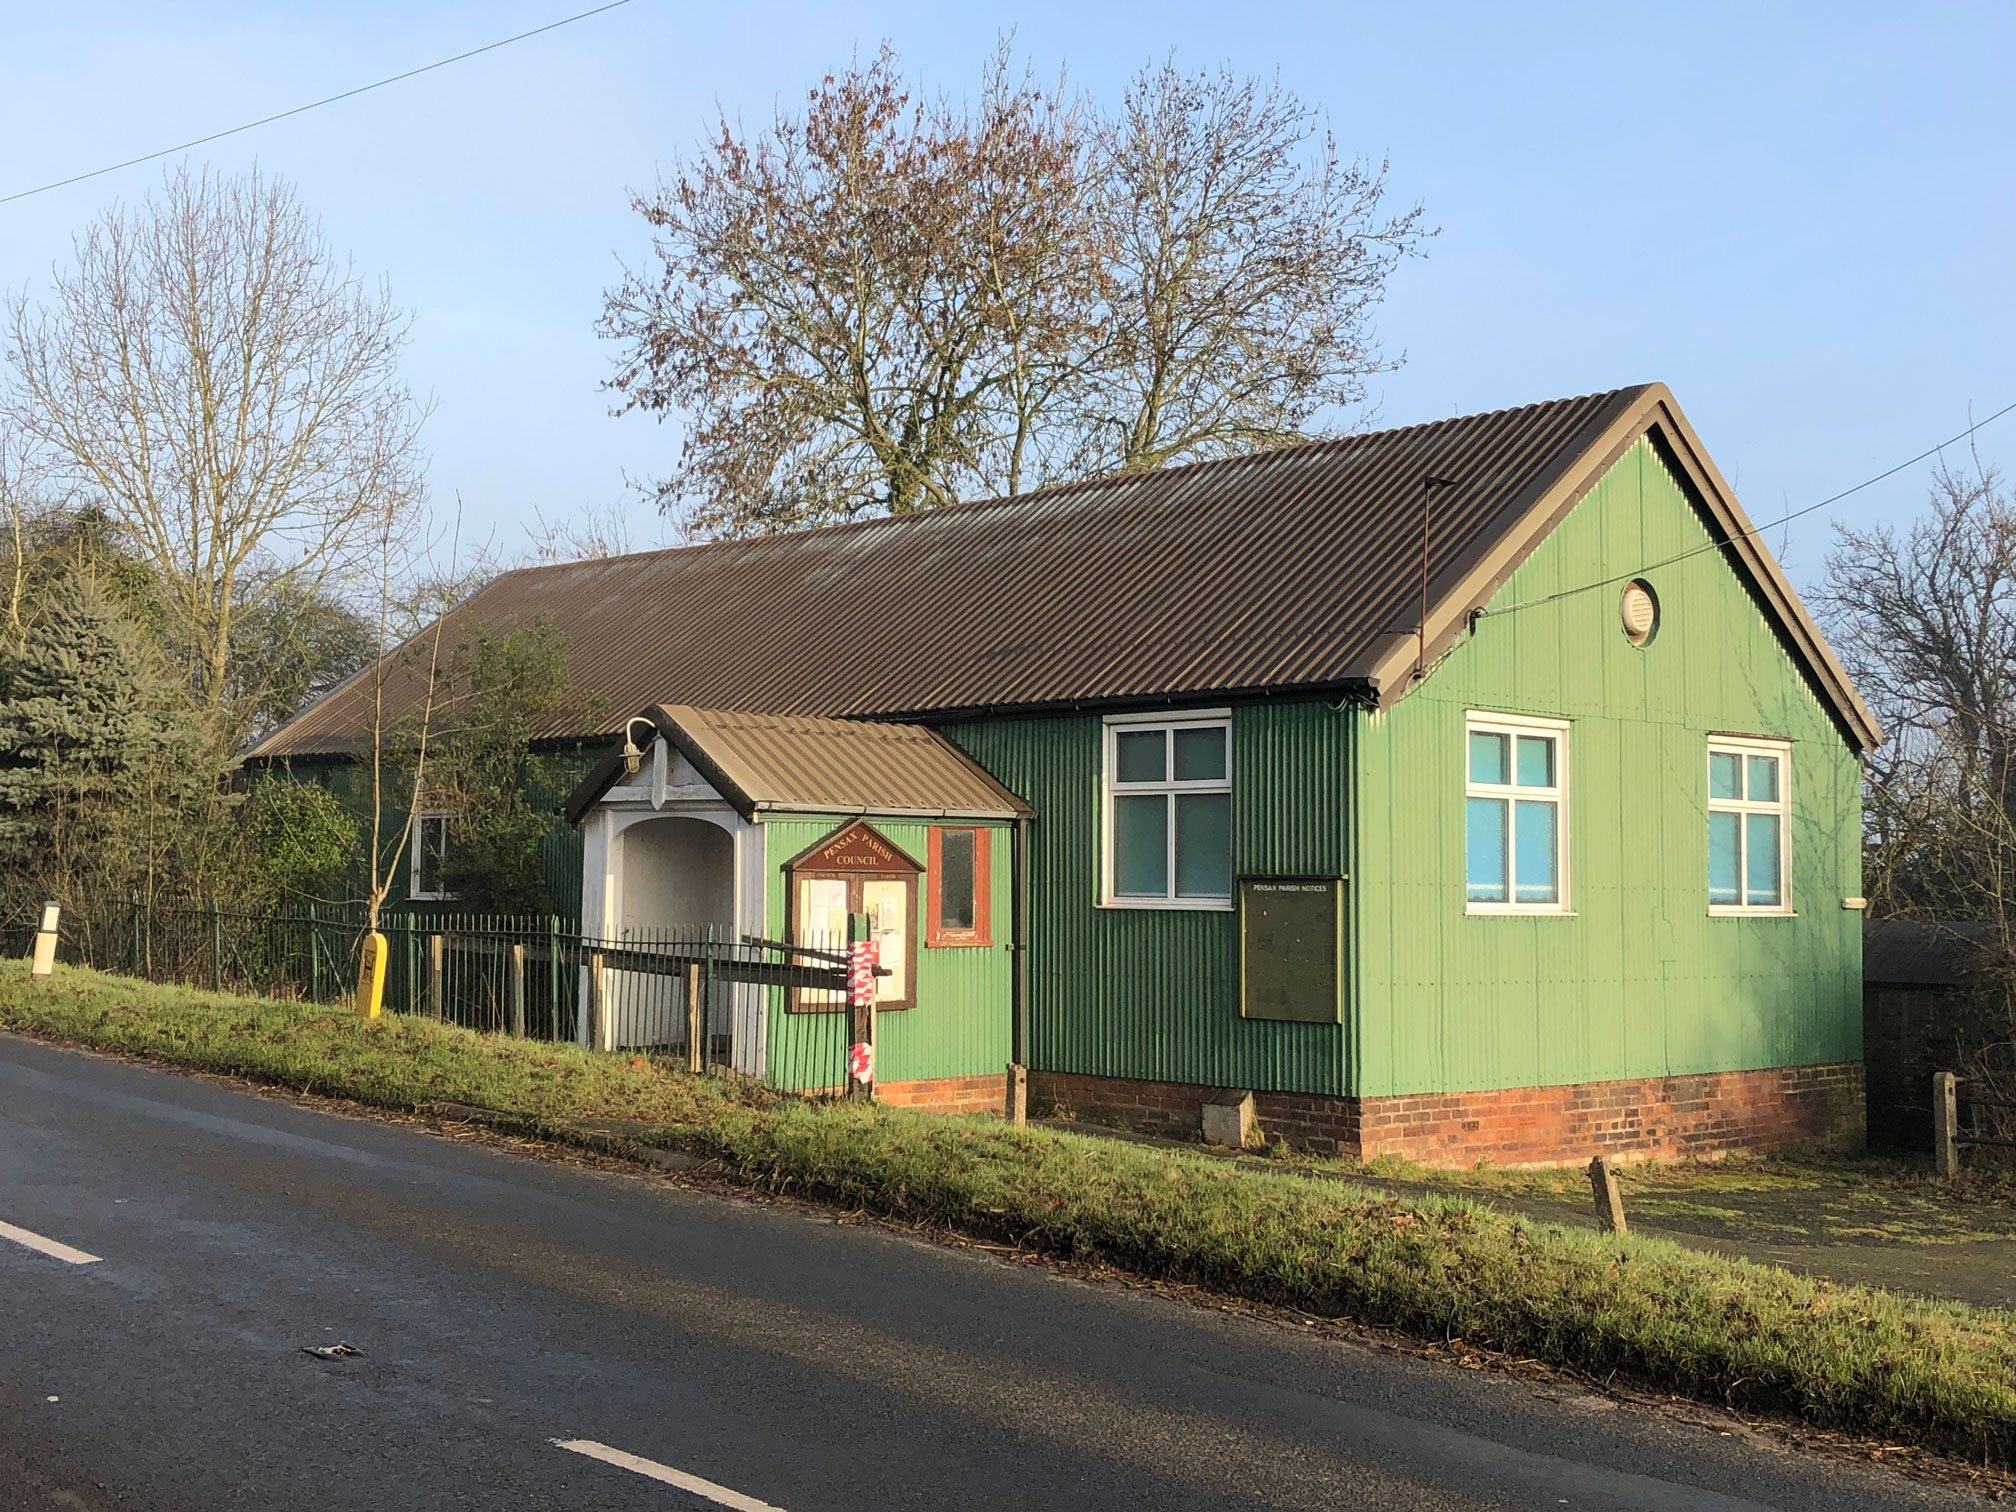 A single-storey prefabricated village hall with a porch and gabled roof.